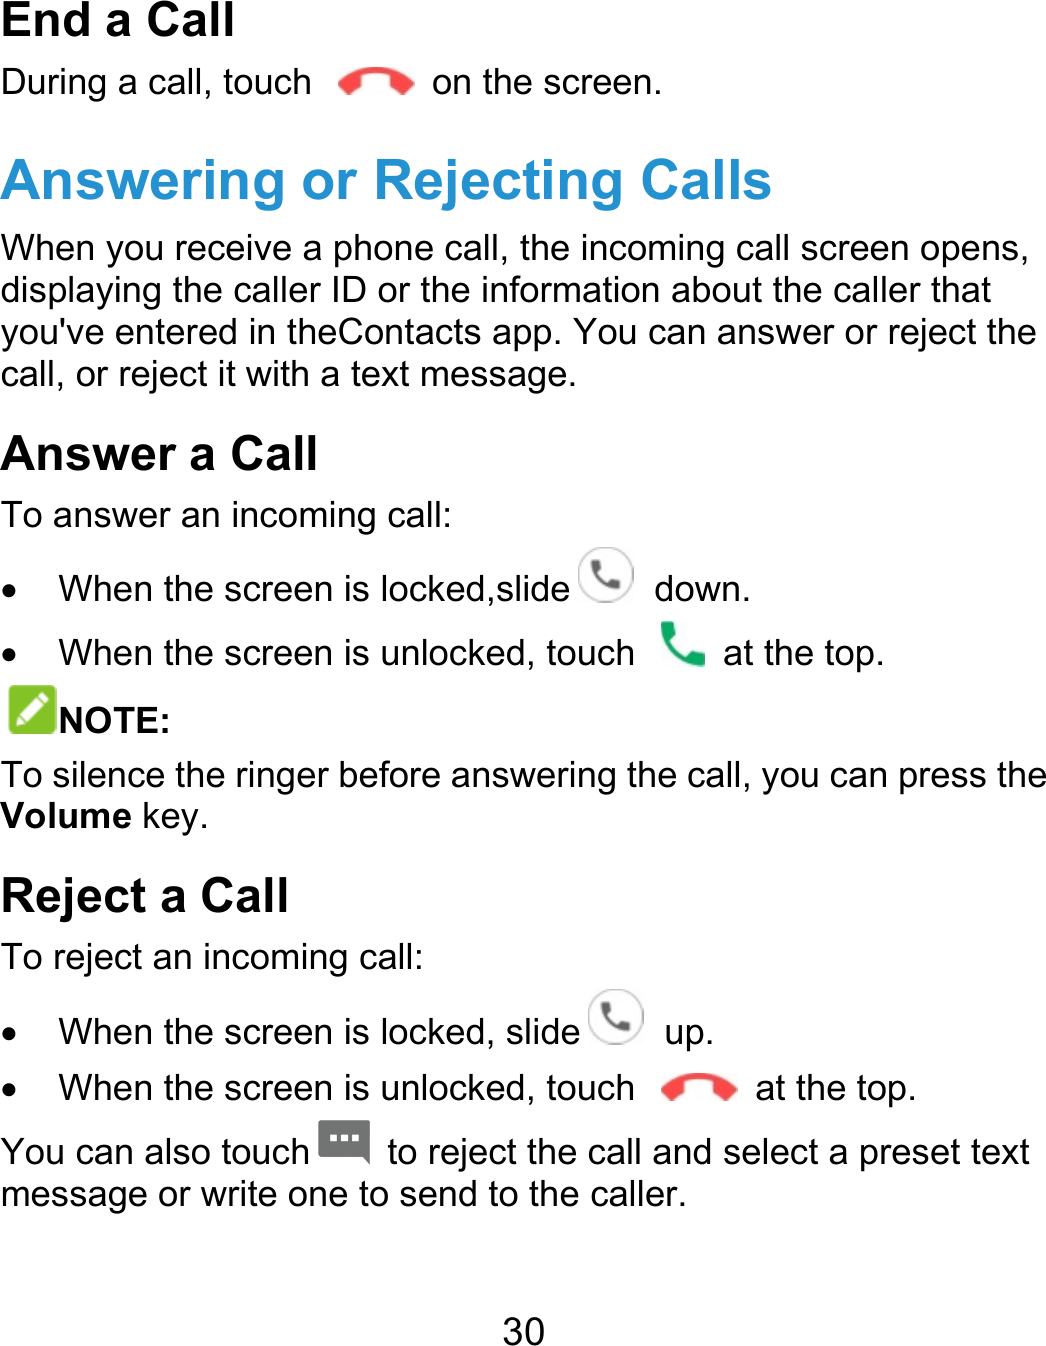  30 End a Call During a call, touch    on the screen. Answering or Rejecting Calls When you receive a phone call, the incoming call screen opens, displaying the caller ID or the information about the caller that you&apos;ve entered in theContacts app. You can answer or reject the call, or reject it with a text message. Answer a Call To answer an incoming call:   When the screen is locked,slide   down.   When the screen is unlocked, touch    at the top. NOTE: To silence the ringer before answering the call, you can press the Volume key. Reject a Call To reject an incoming call:   When the screen is locked, slide   up.   When the screen is unlocked, touch    at the top. You can also touch   to reject the call and select a preset text message or write one to send to the caller. 